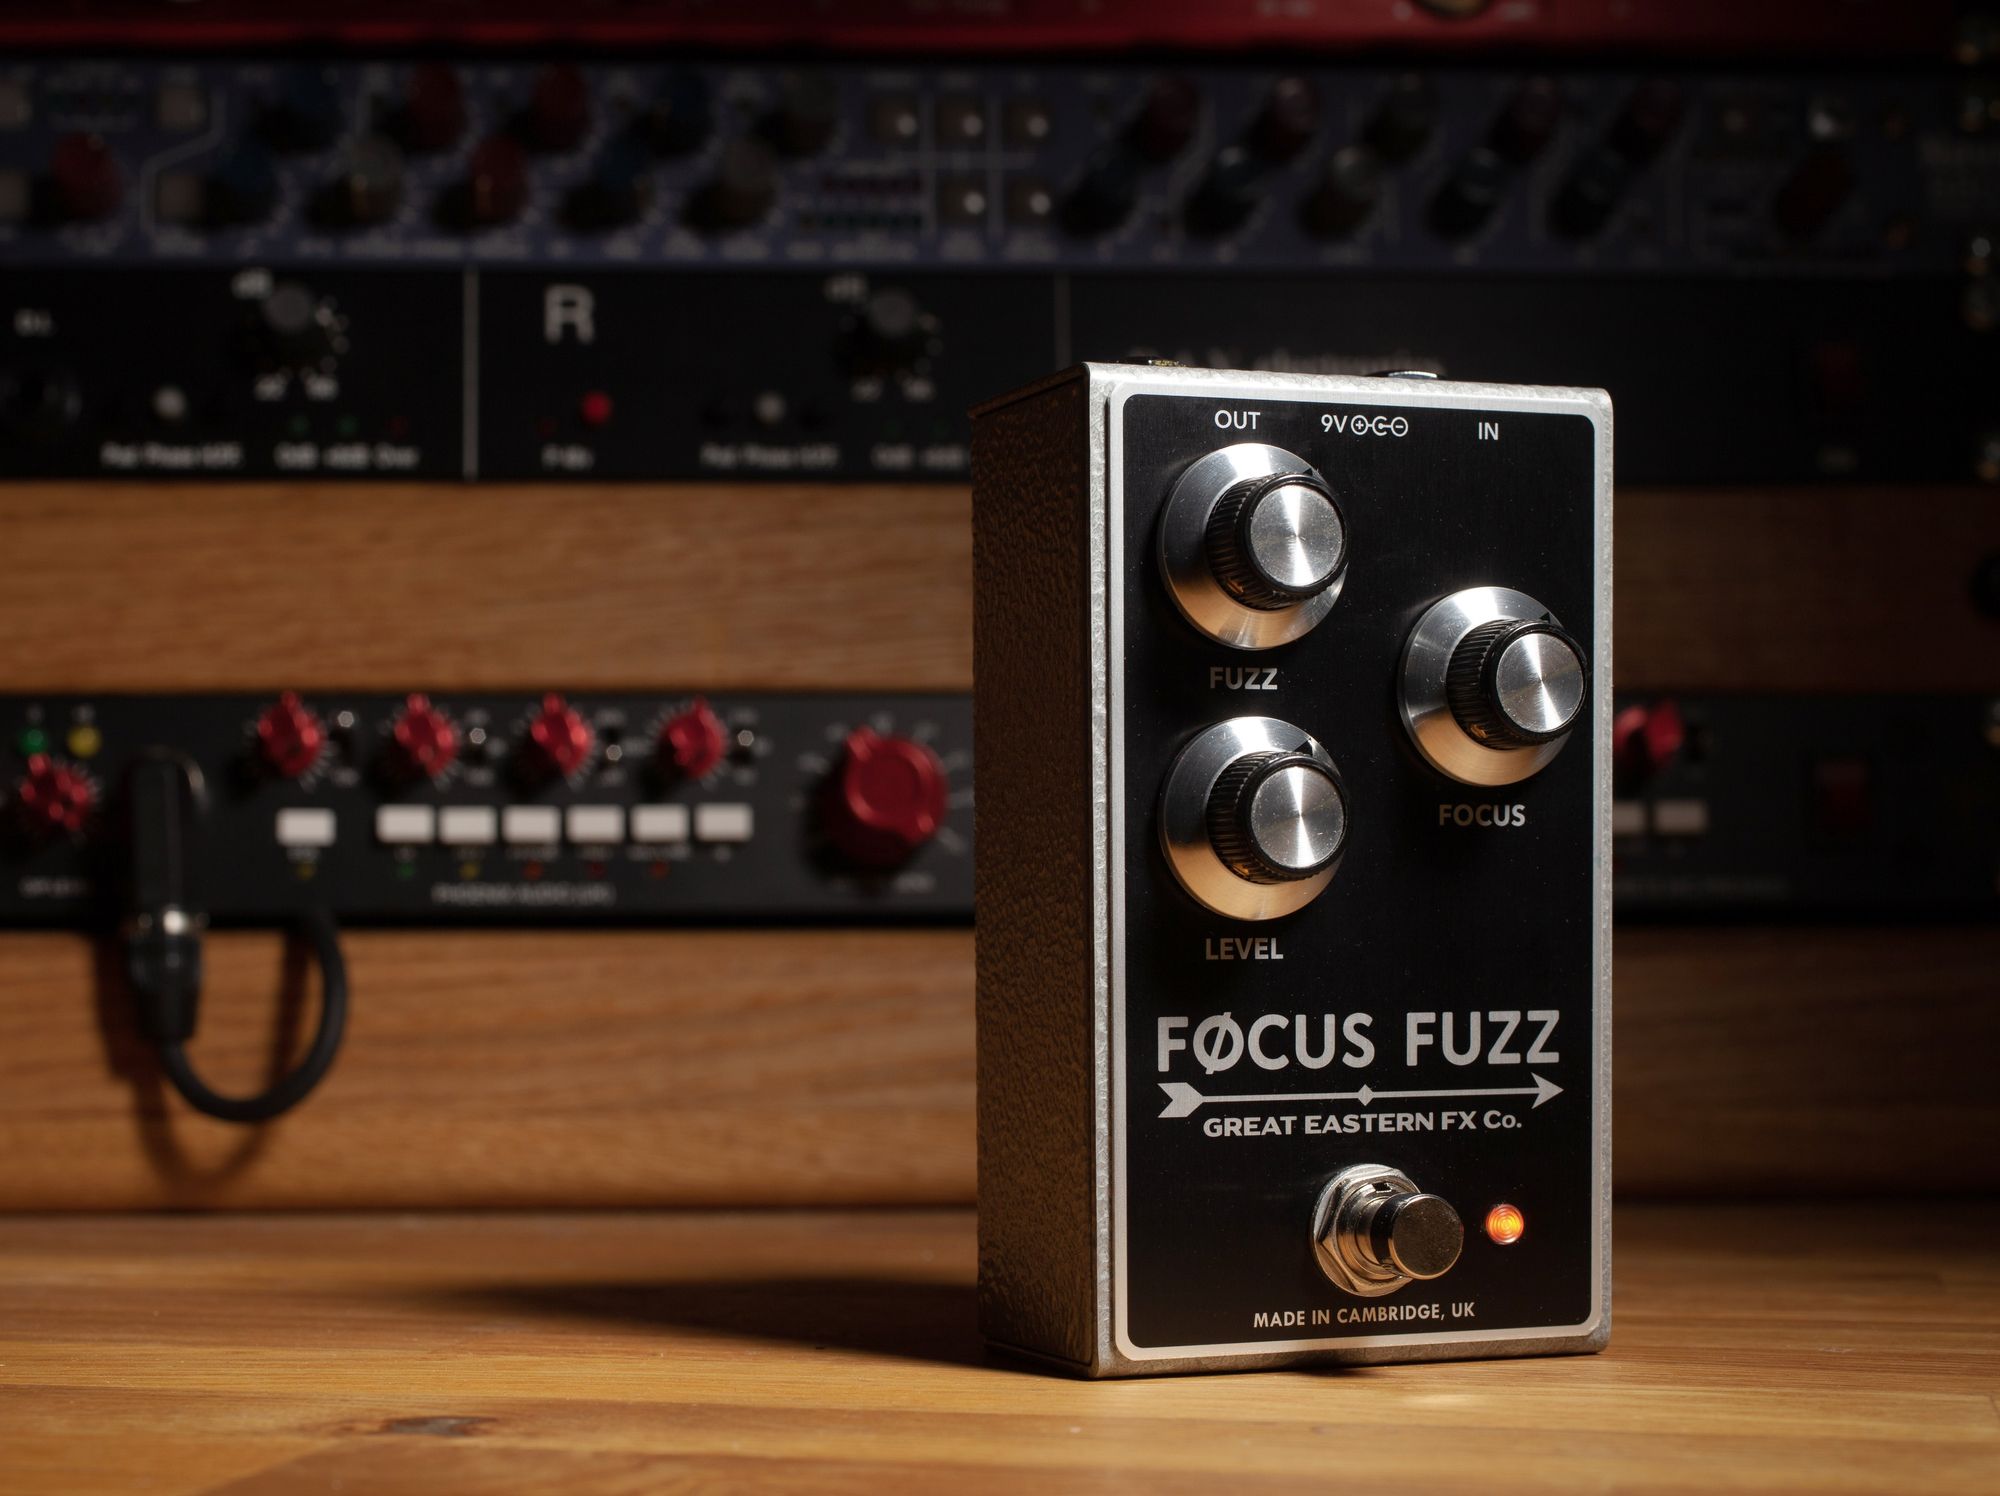 Great Eastern FX Co. Launches the Focus Fuzz